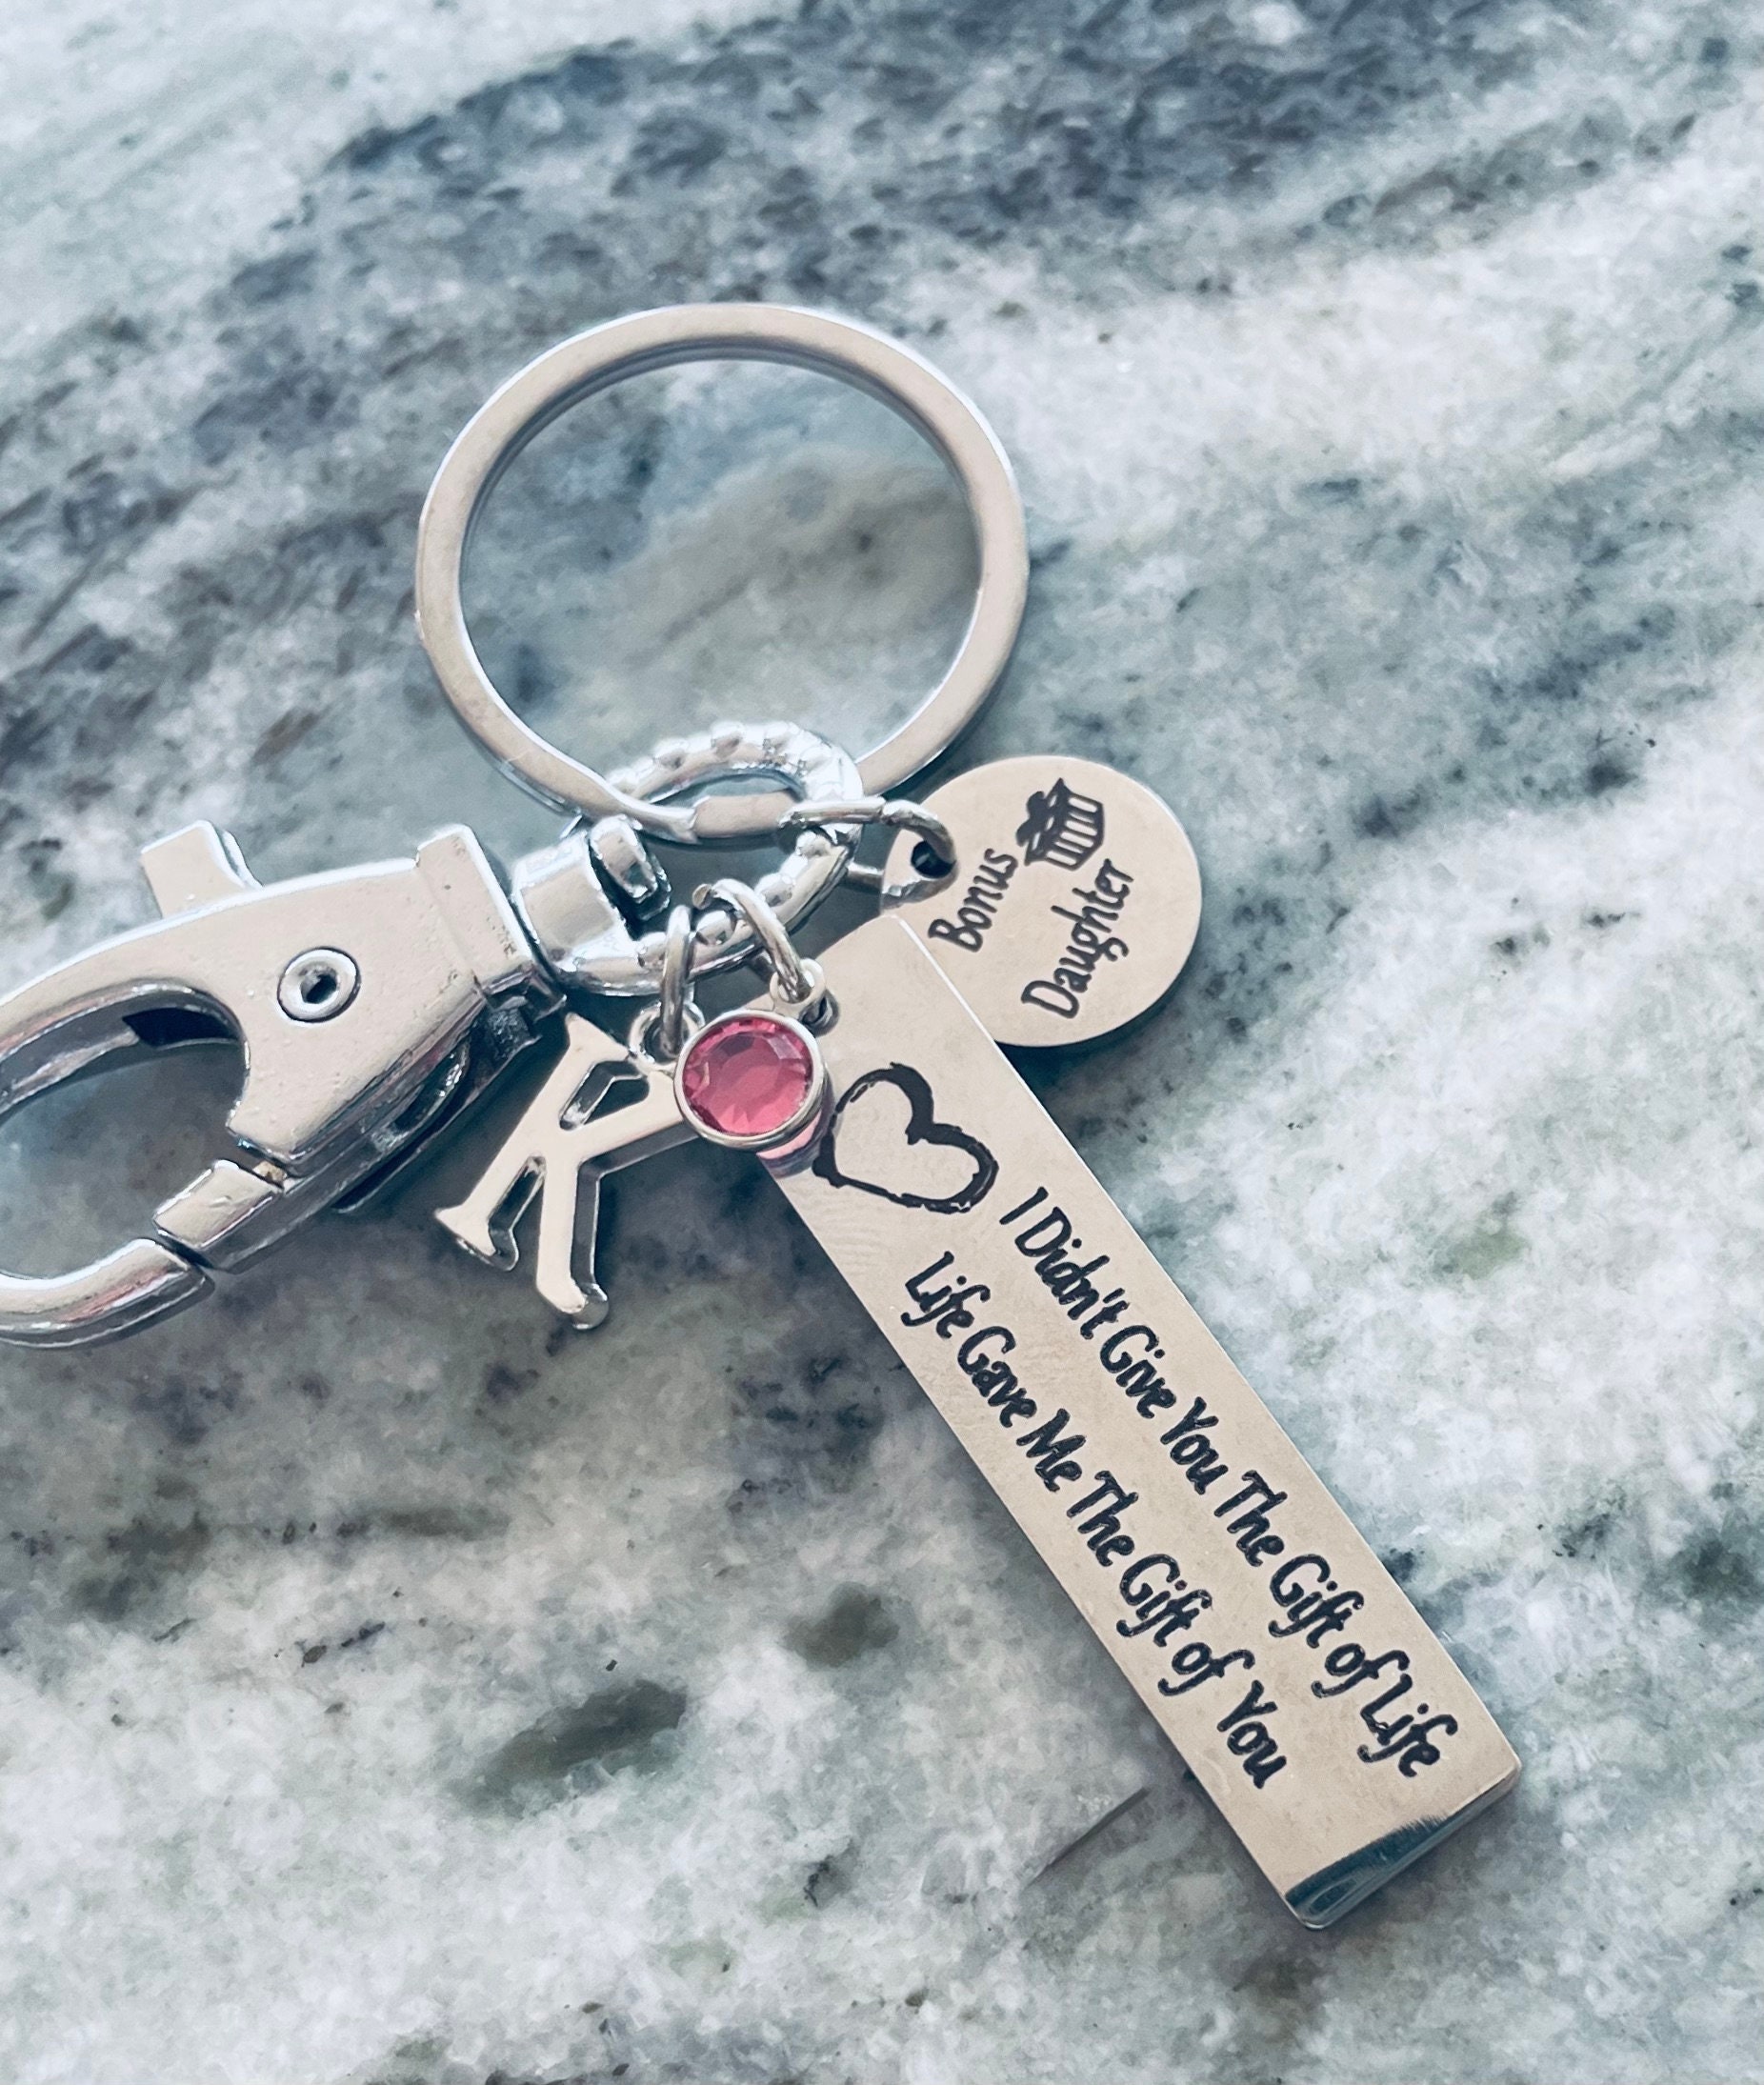 Tos Inspirational Keychain for Best Friend Brithday Gift for Son and Daughter from Dad or Mom Gift